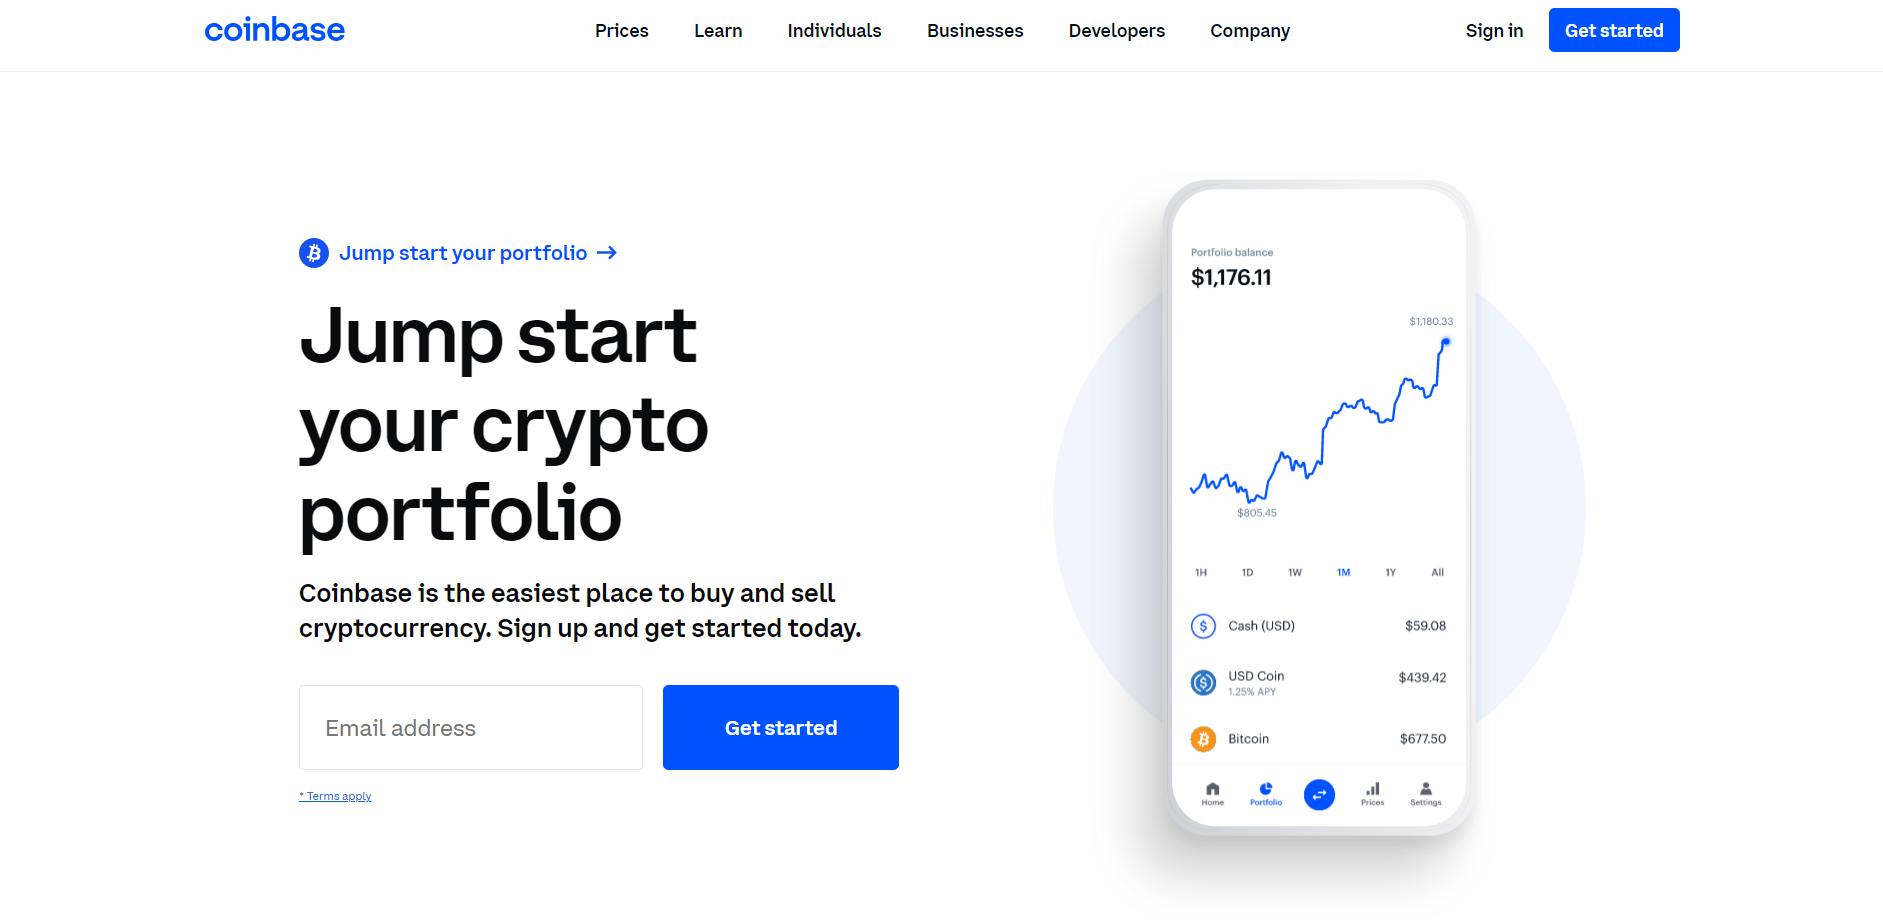 coinbase sign in